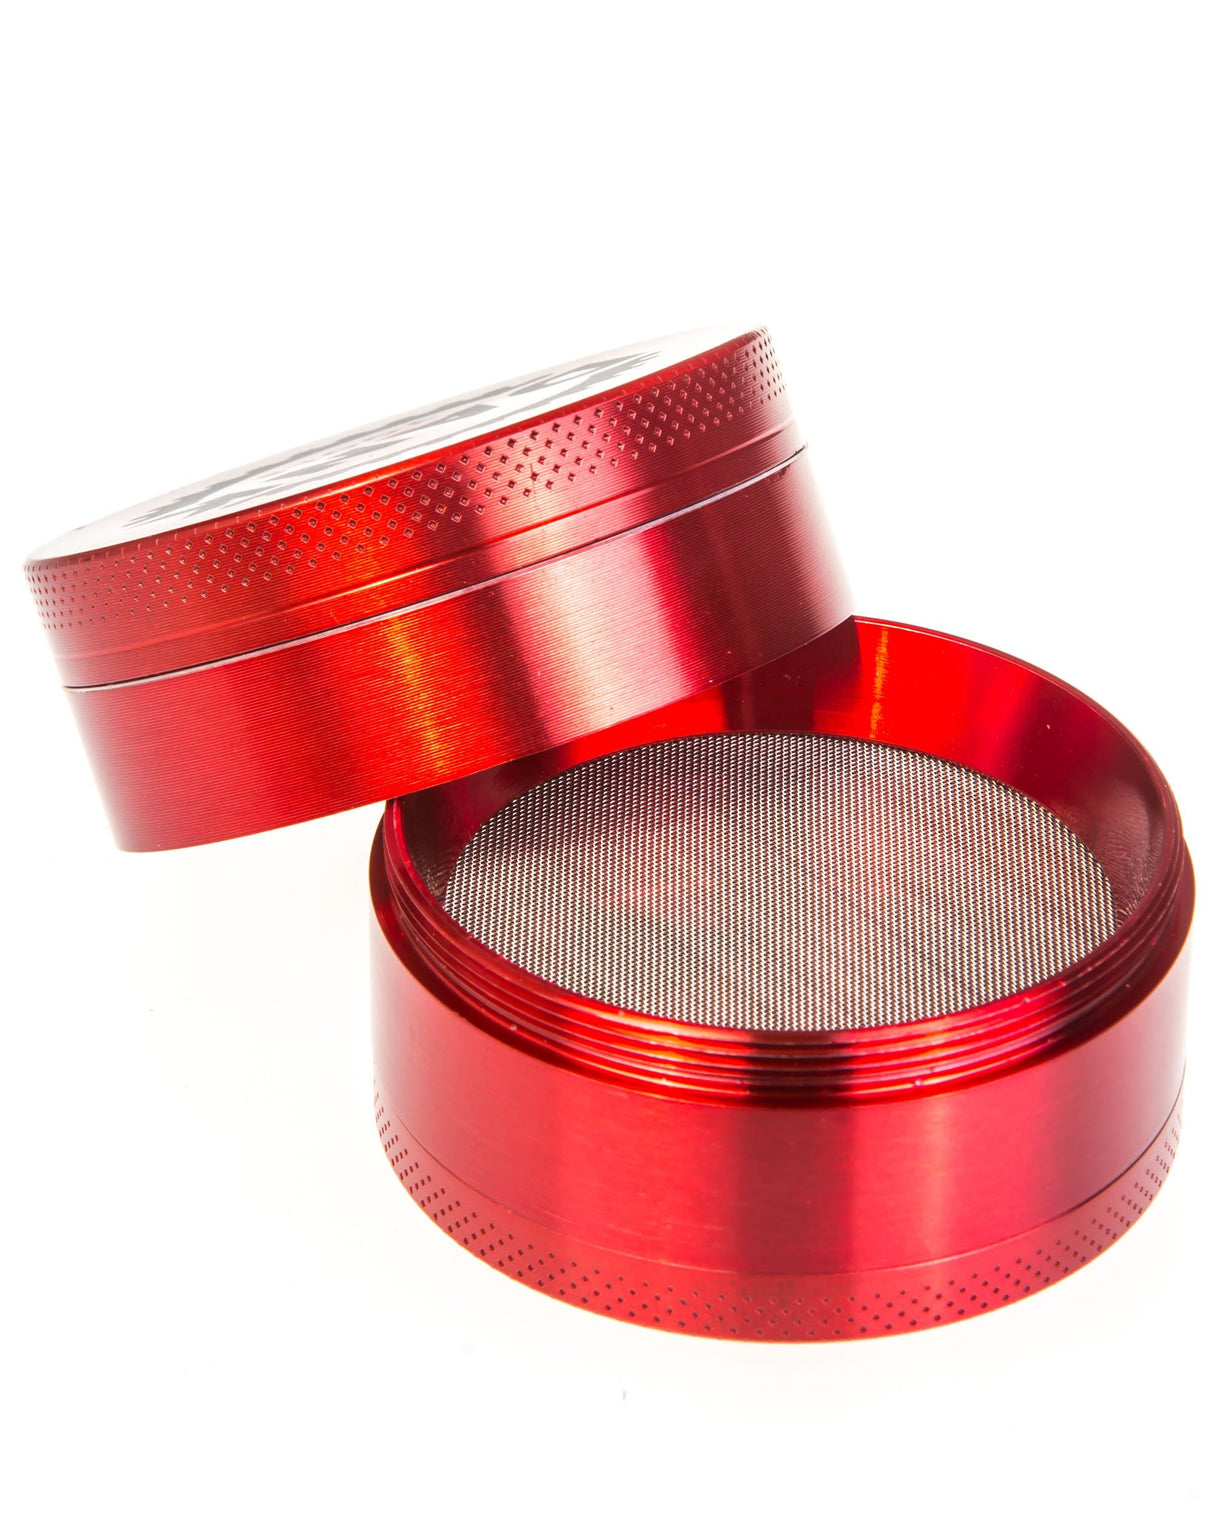 Dank Tools 50mm Red Aluminum 4-Piece Herb Grinder with Kief Catcher - Angled View